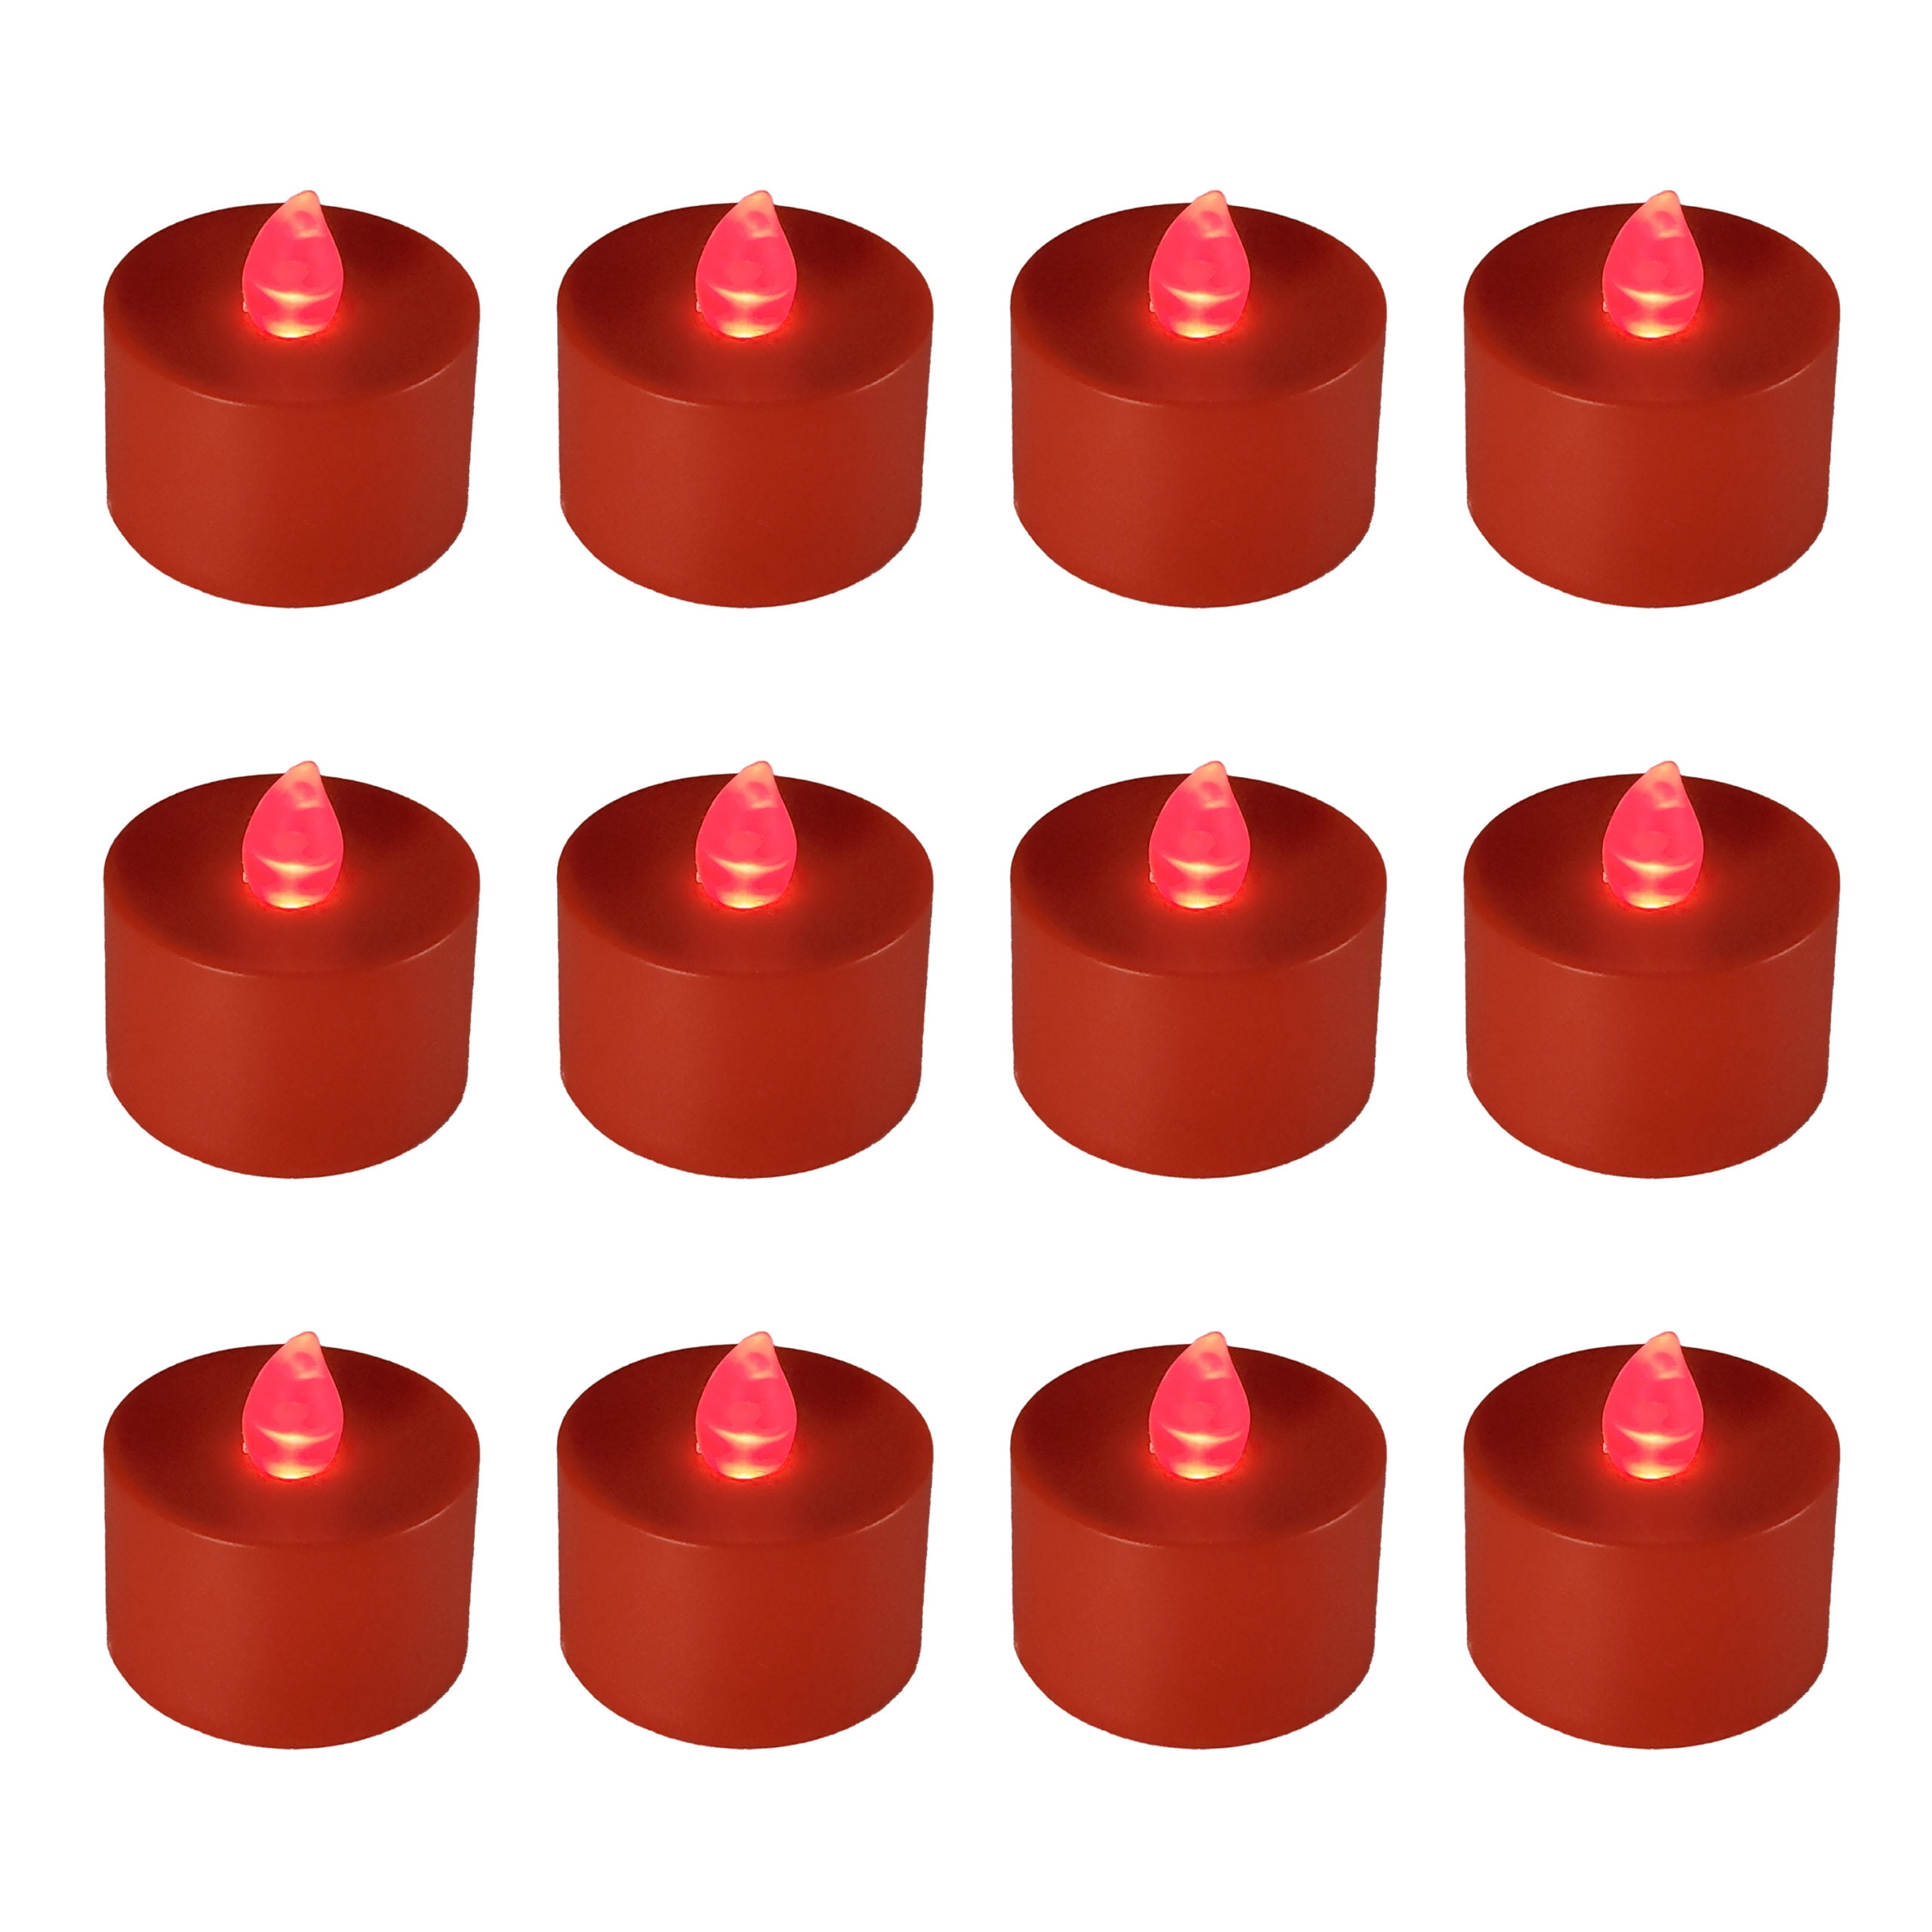 Merrynights LED Tea Lights Candles Battery Operated Bulk, 24-Pack  Long-Lasting Flameless Tealight Candles, Realistic Tea Lights for  Valentine's Day